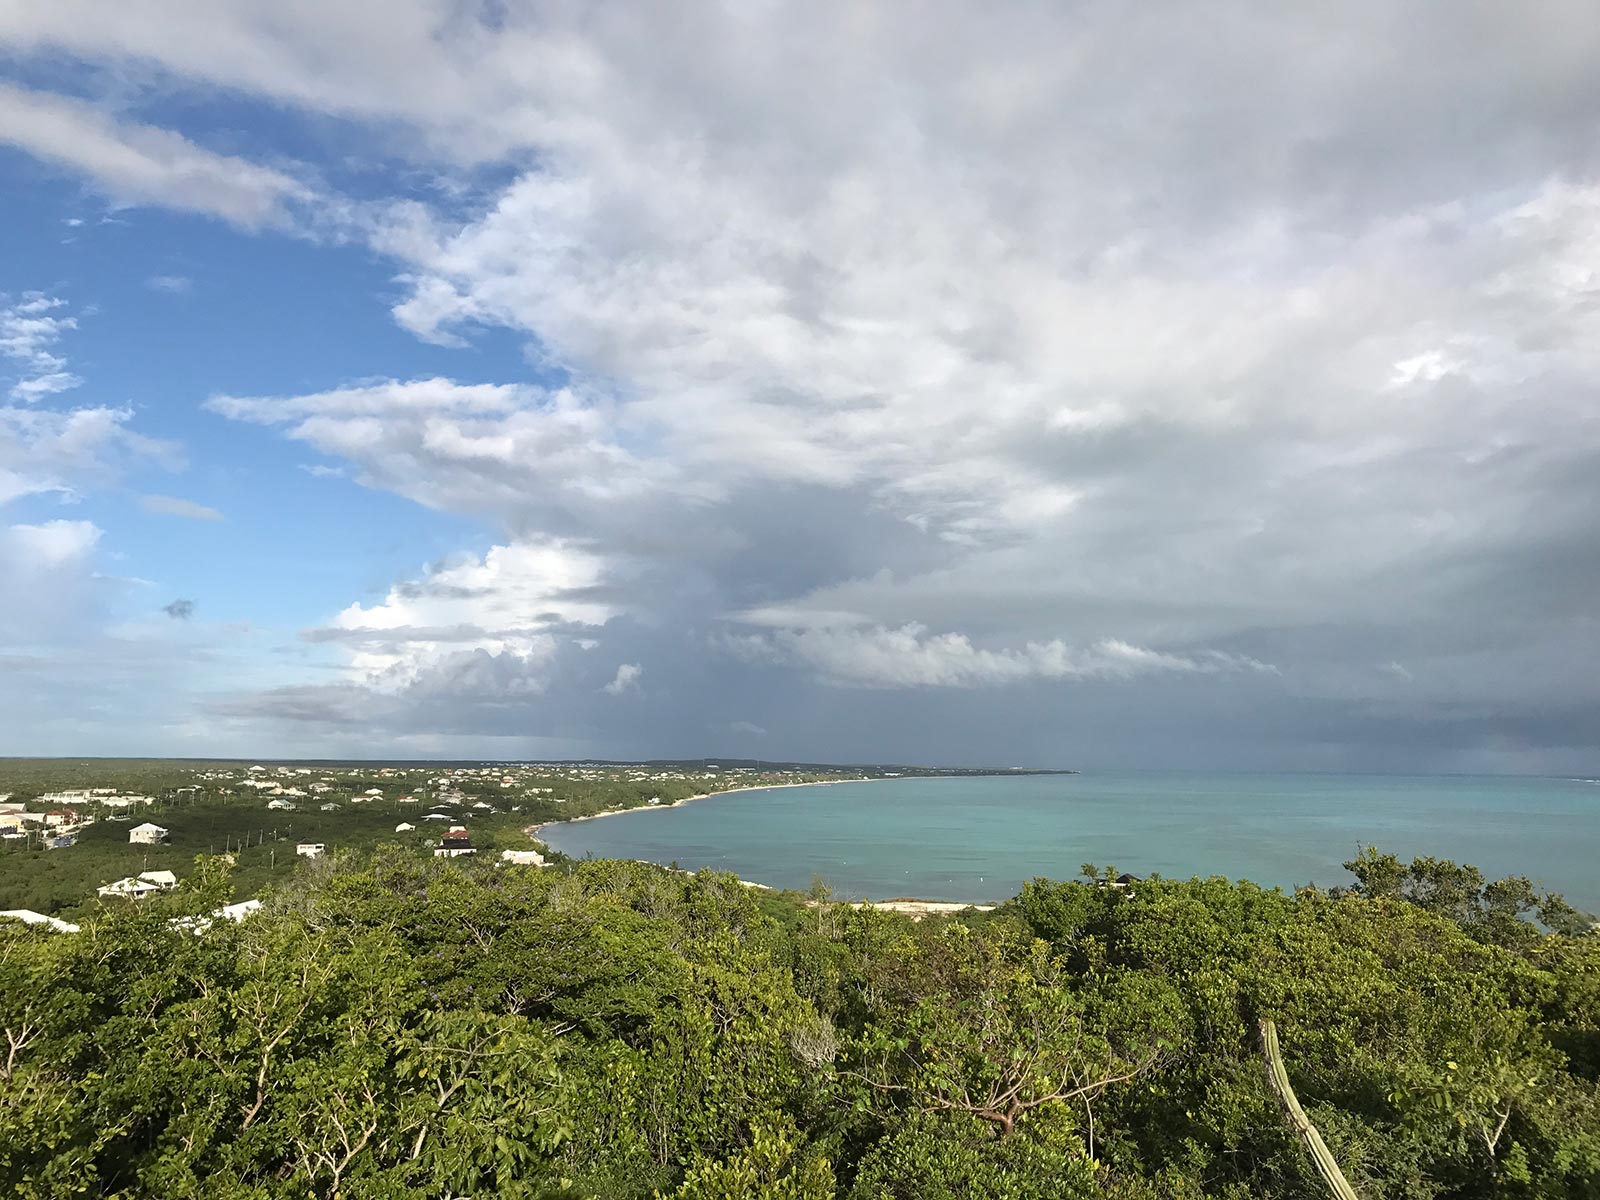 Cloudy at viewpoint in Turks & Caicos. The scariest flight of my life